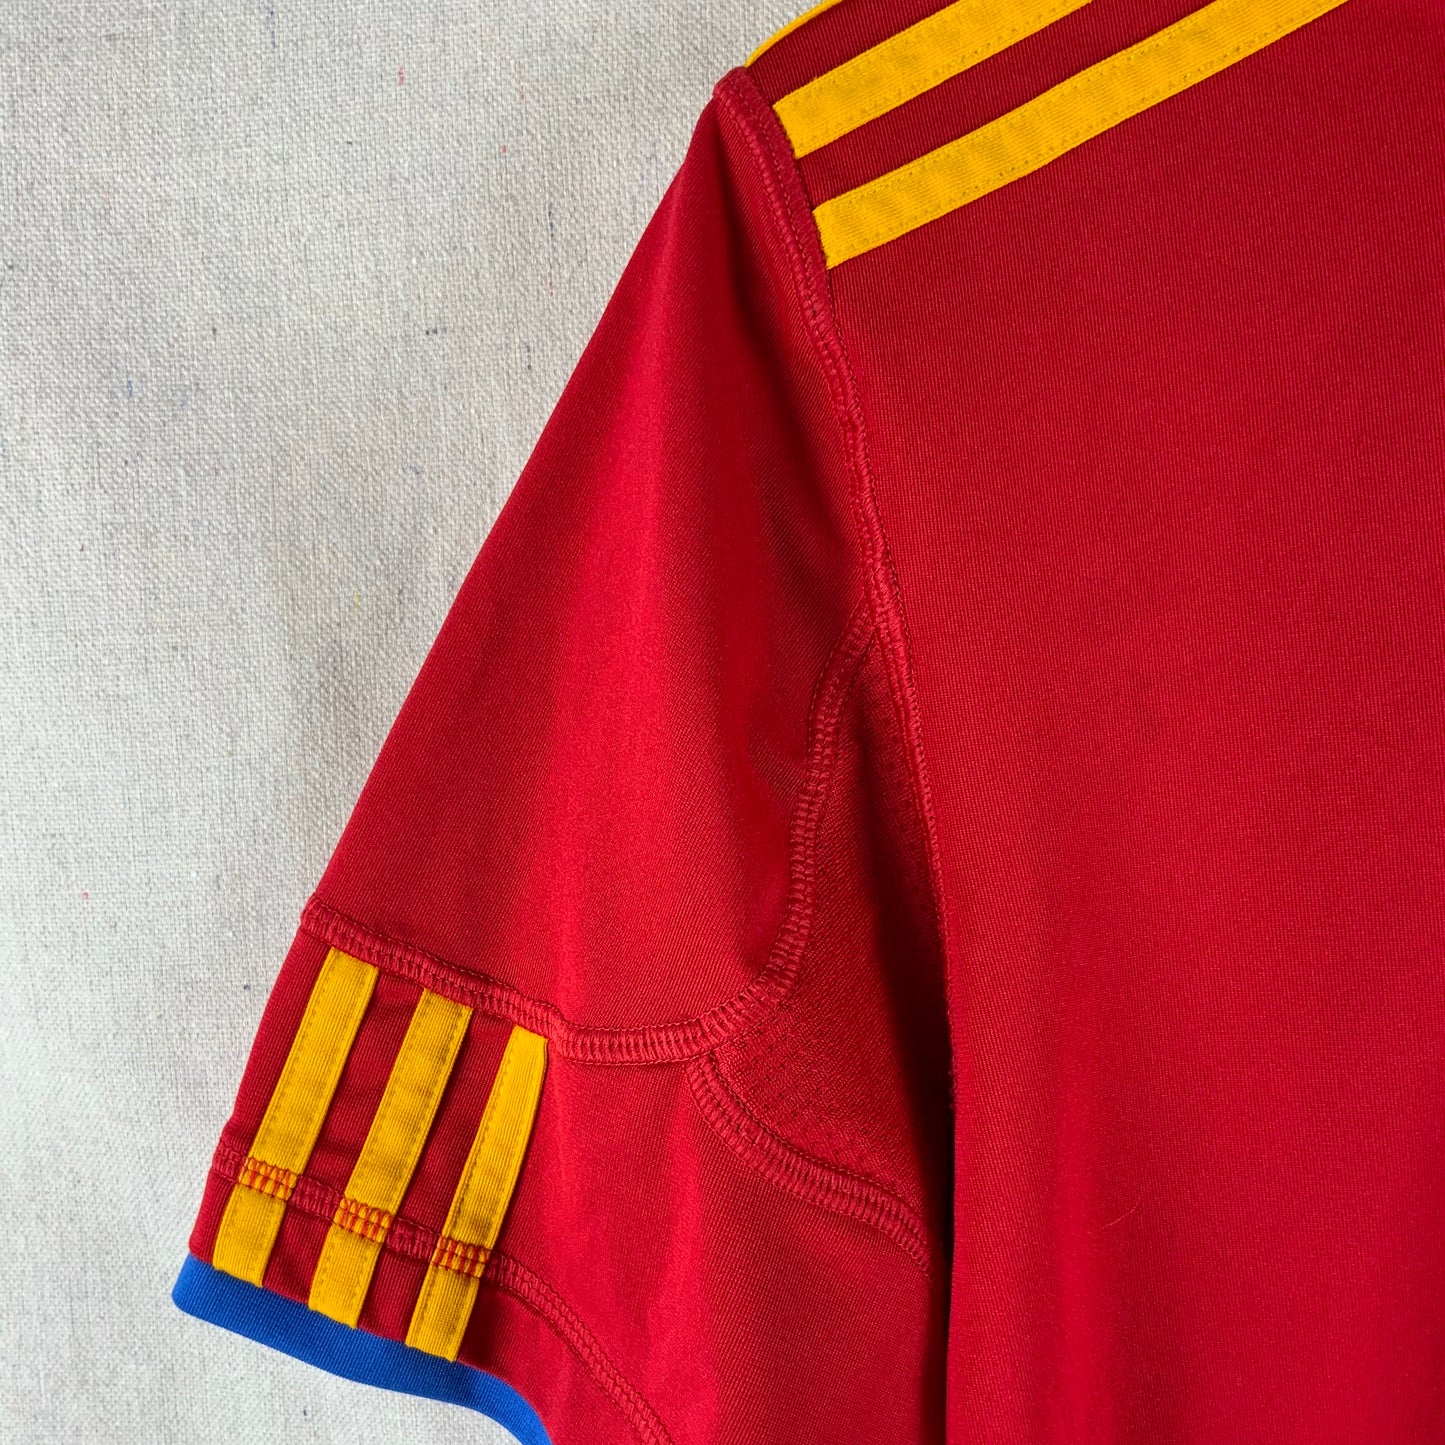 Spain Home 2010 (youth)